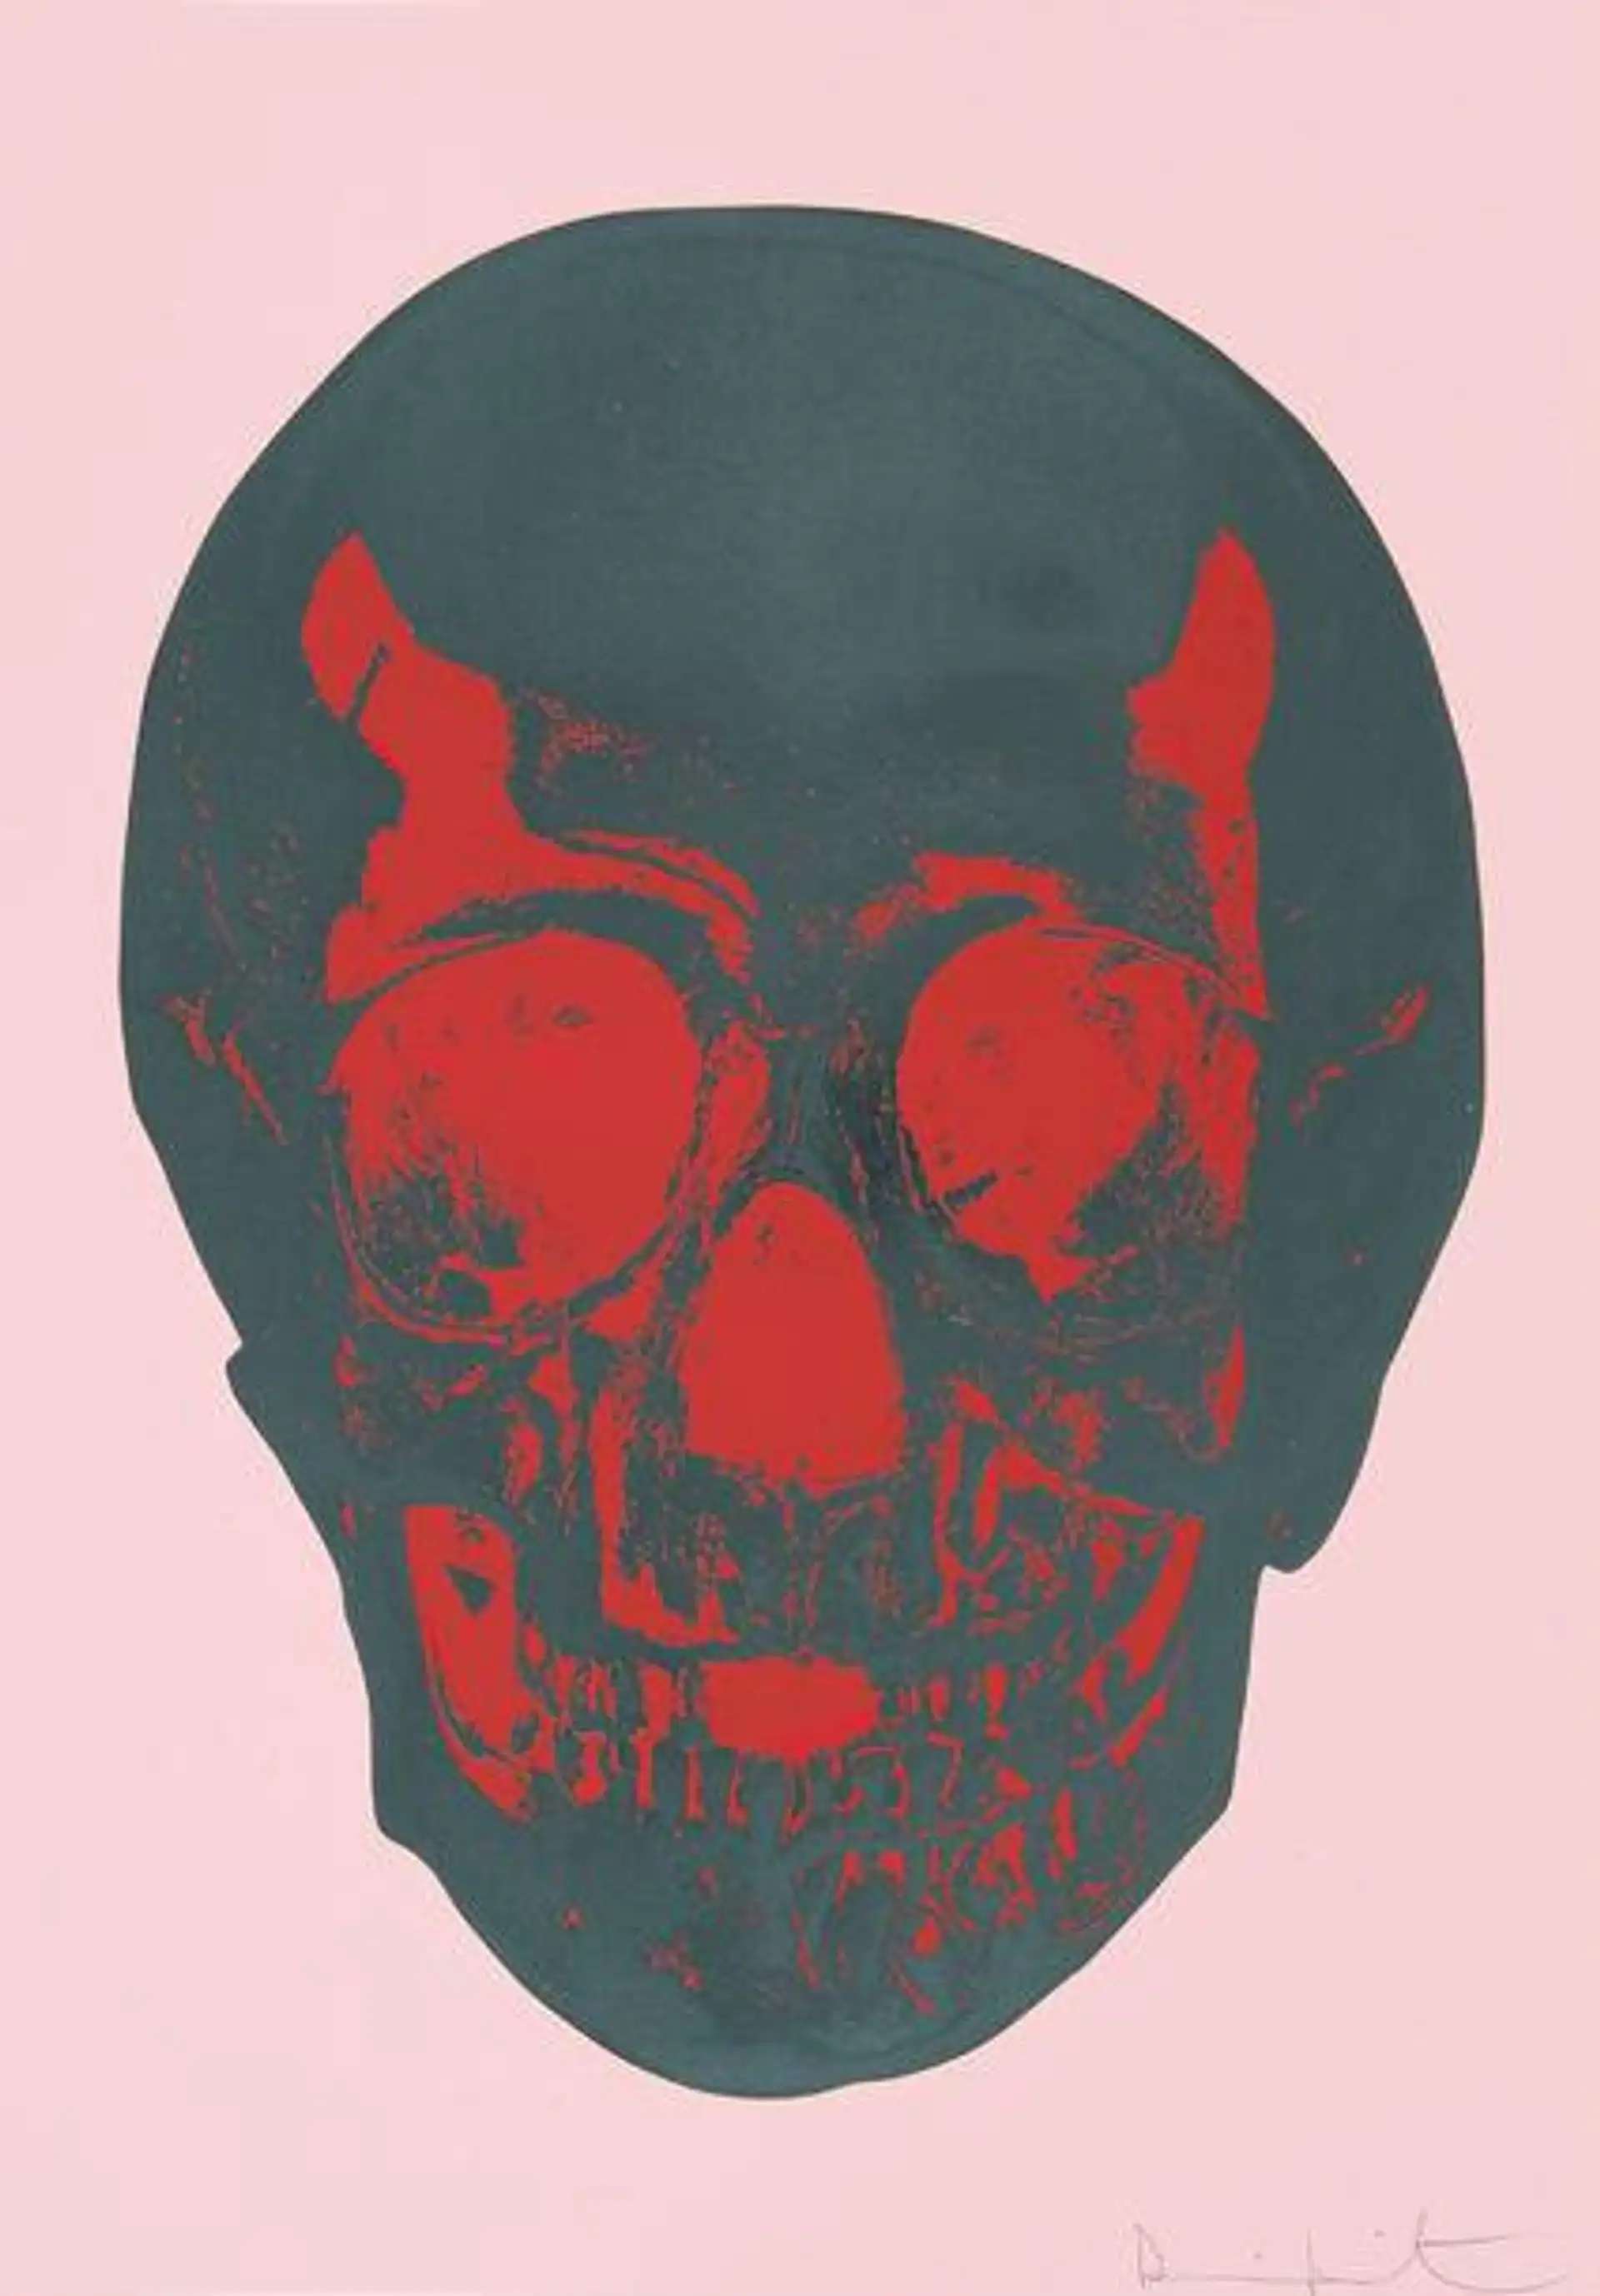 Till Death Do Us Part (candy floss pink, racing green, pigment red) by Damien Hirst